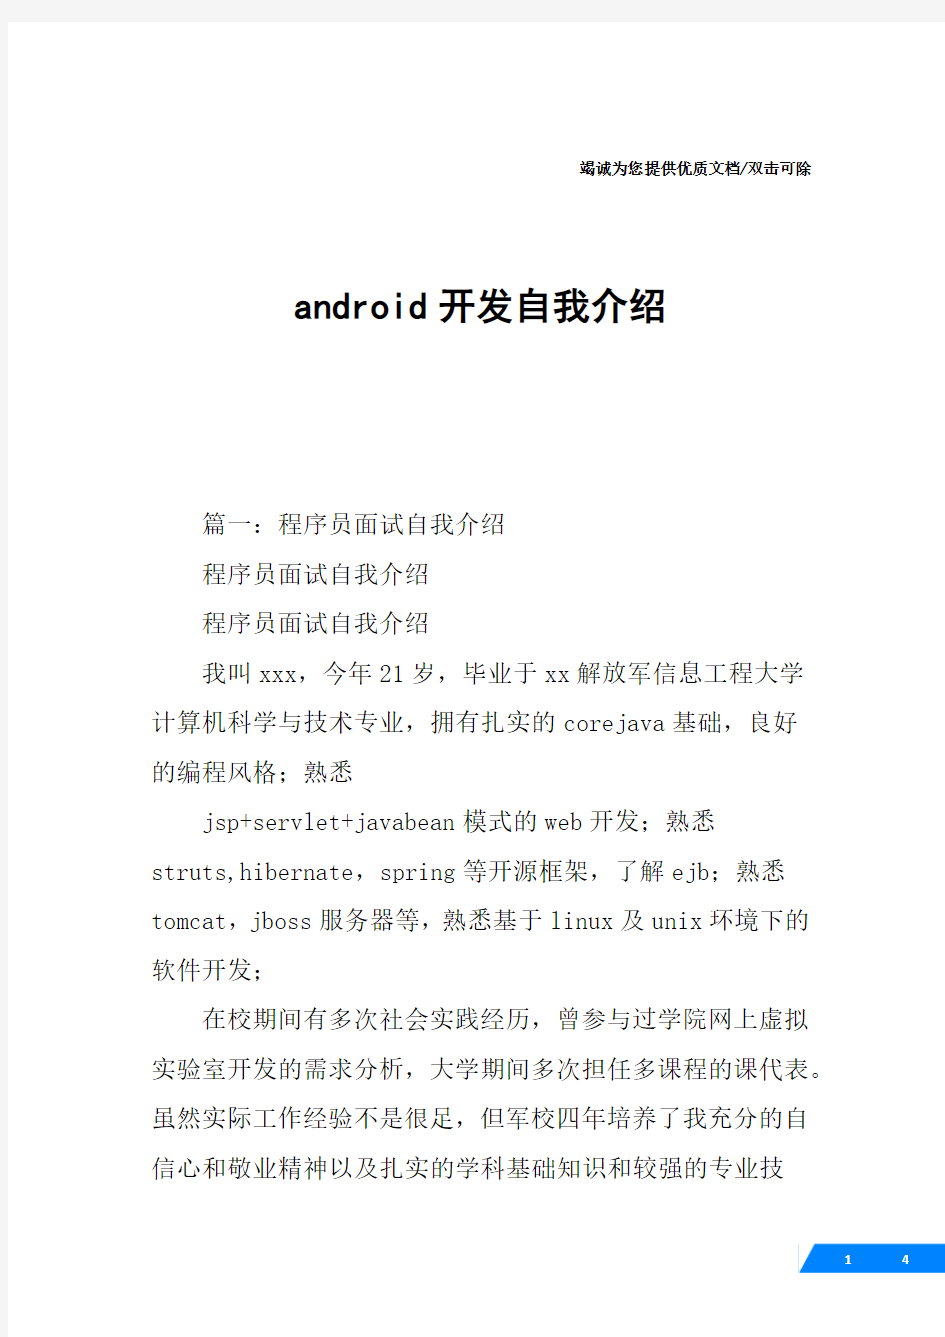 android开发自我介绍